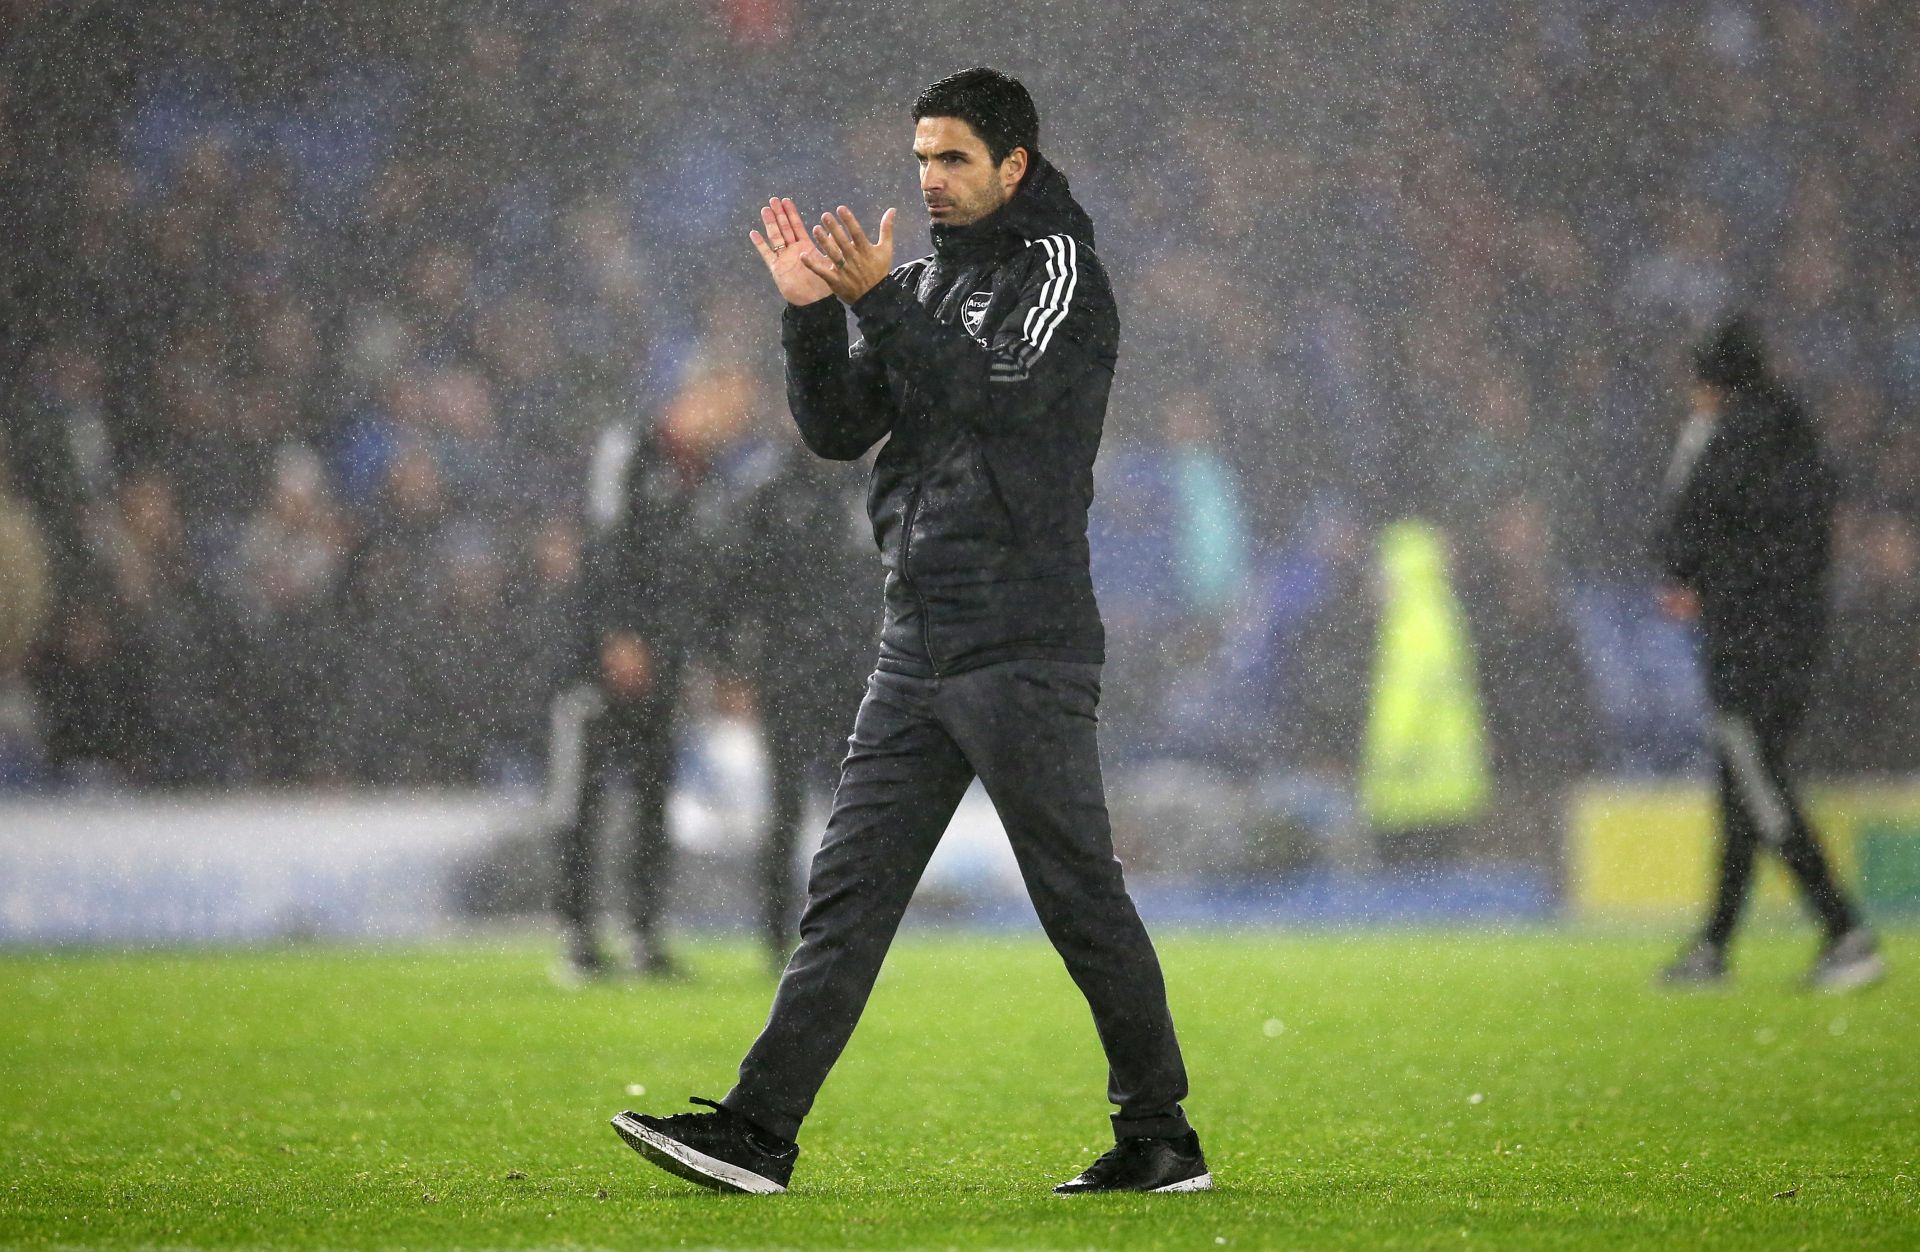 Arsenal manager Mikel Arteta oversaw an impressive win over Leicester City on Saturday.